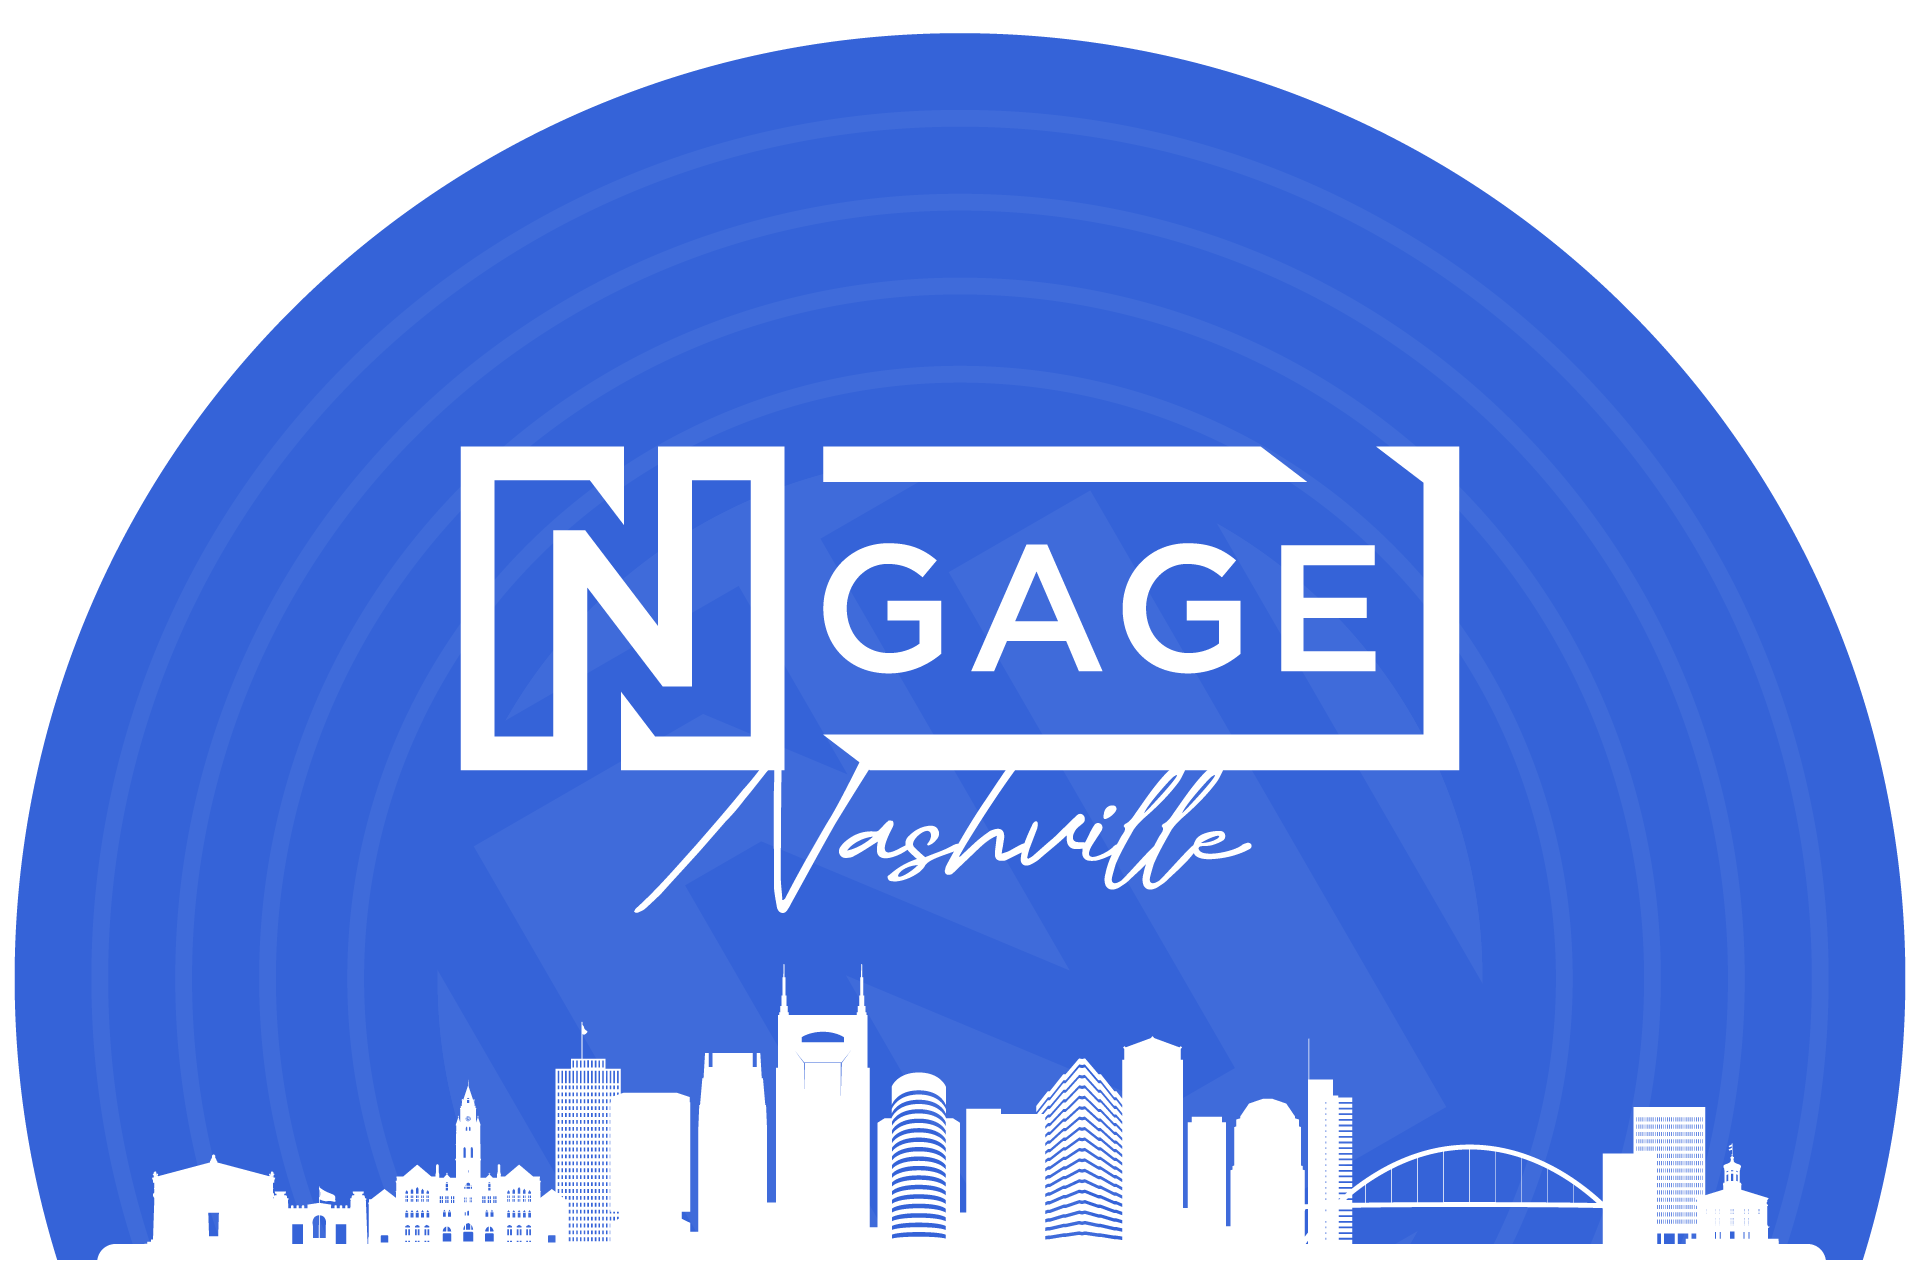 Ngage Element Record Logo Silhouette 3563d8